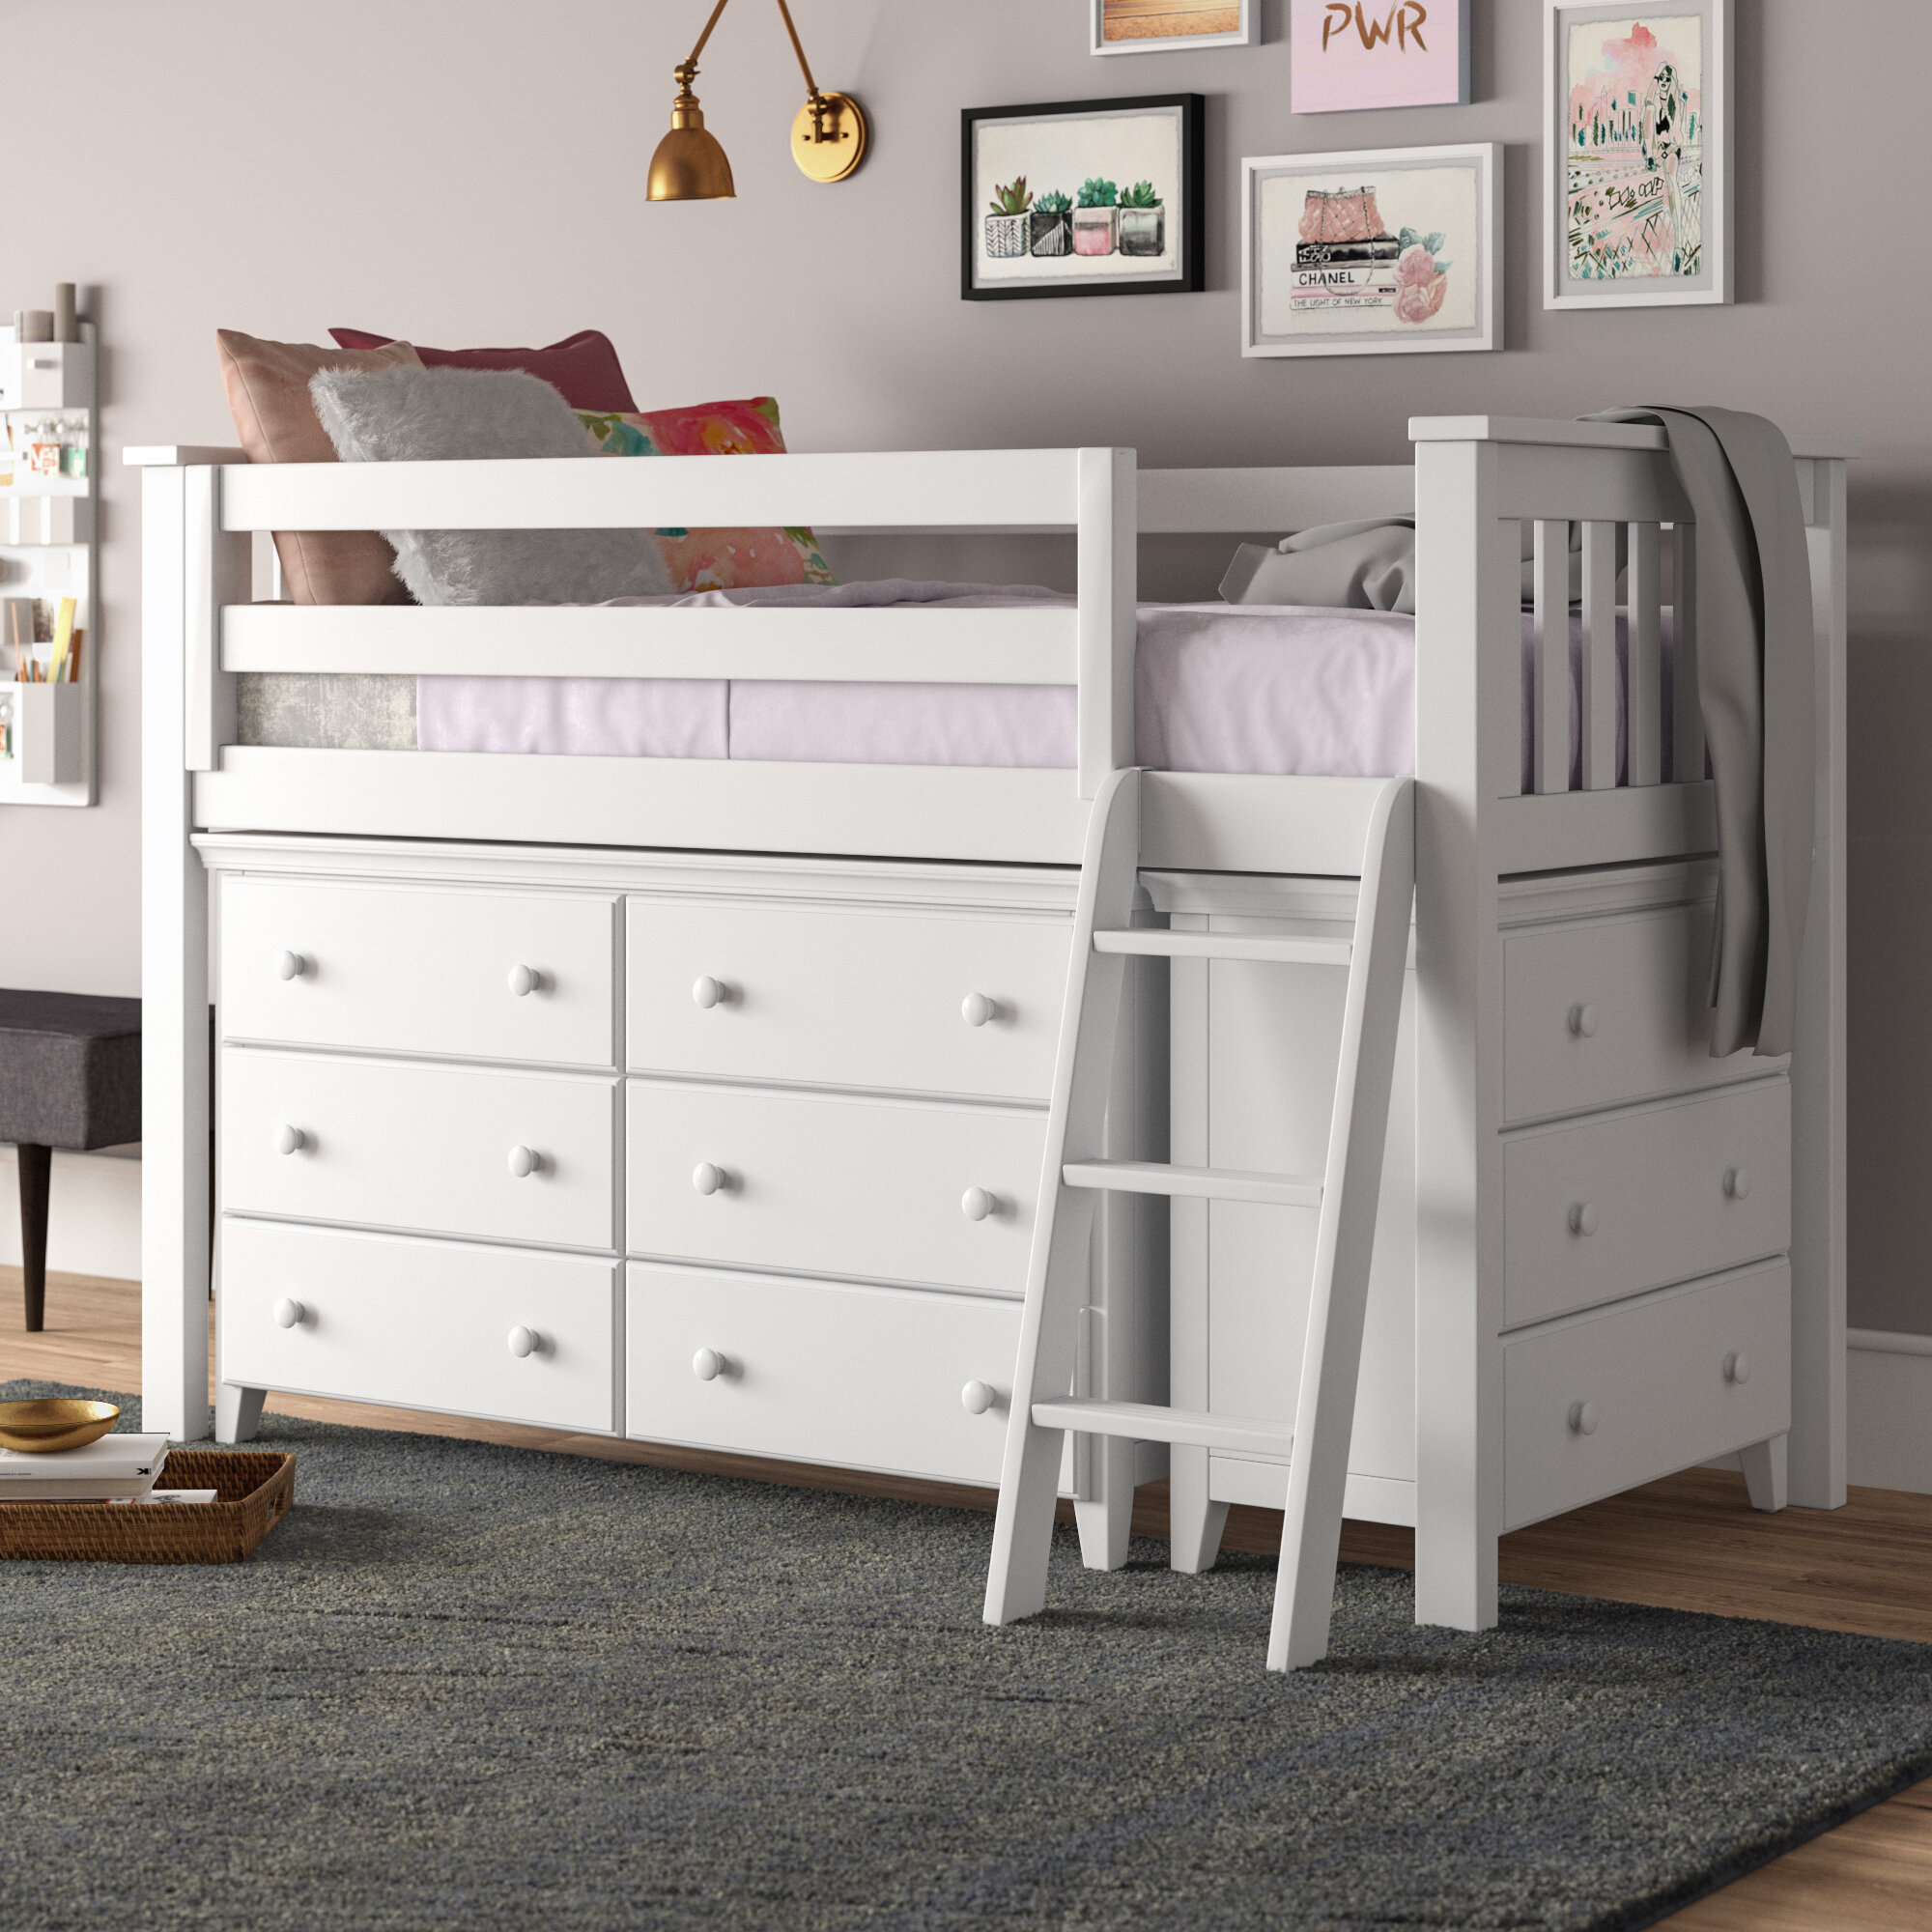 Bunk Beds With Dressers Visualhunt, Bunk Bed With Stairs And Dresser